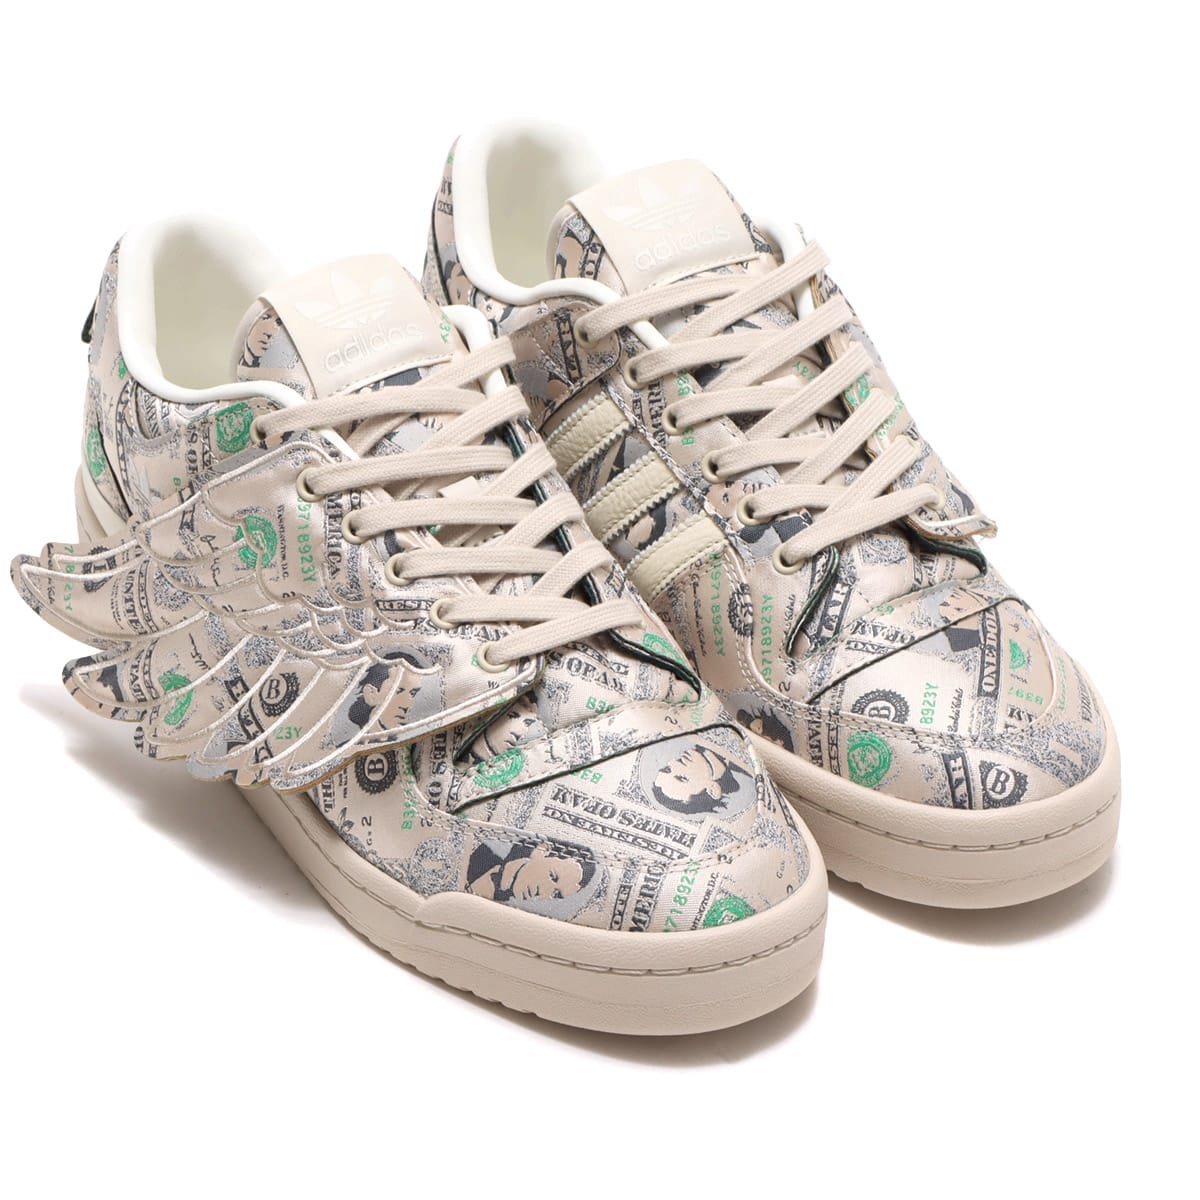 adidas JS FORUM MONEY LO CLEAR BROWN/OFF WHITE/CLEAR BROWN 21FW-S_photo_large